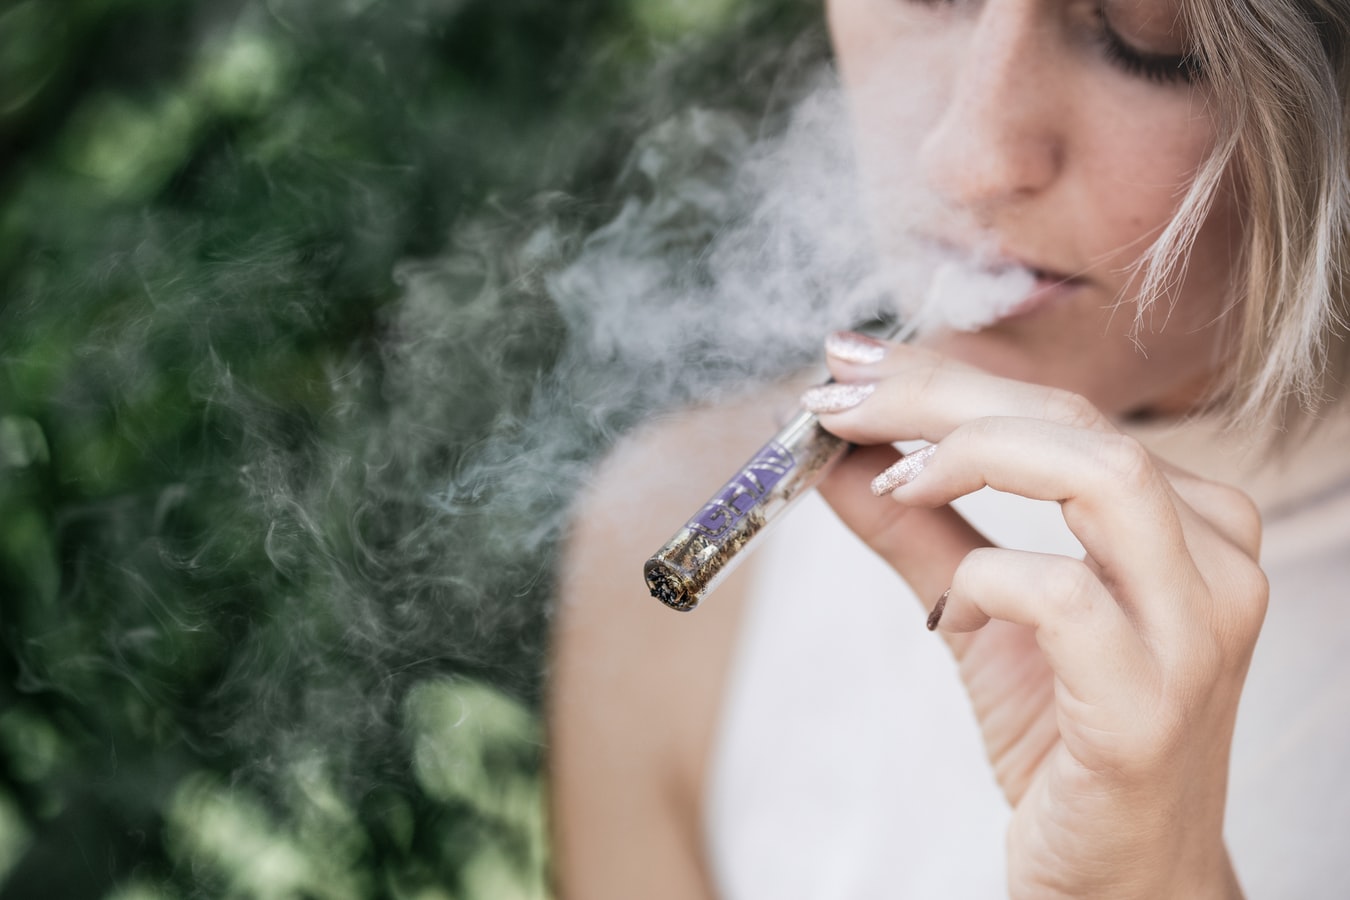 Keeping Discomfort At Bay – 5 Ways To Smoke Safely And In Style